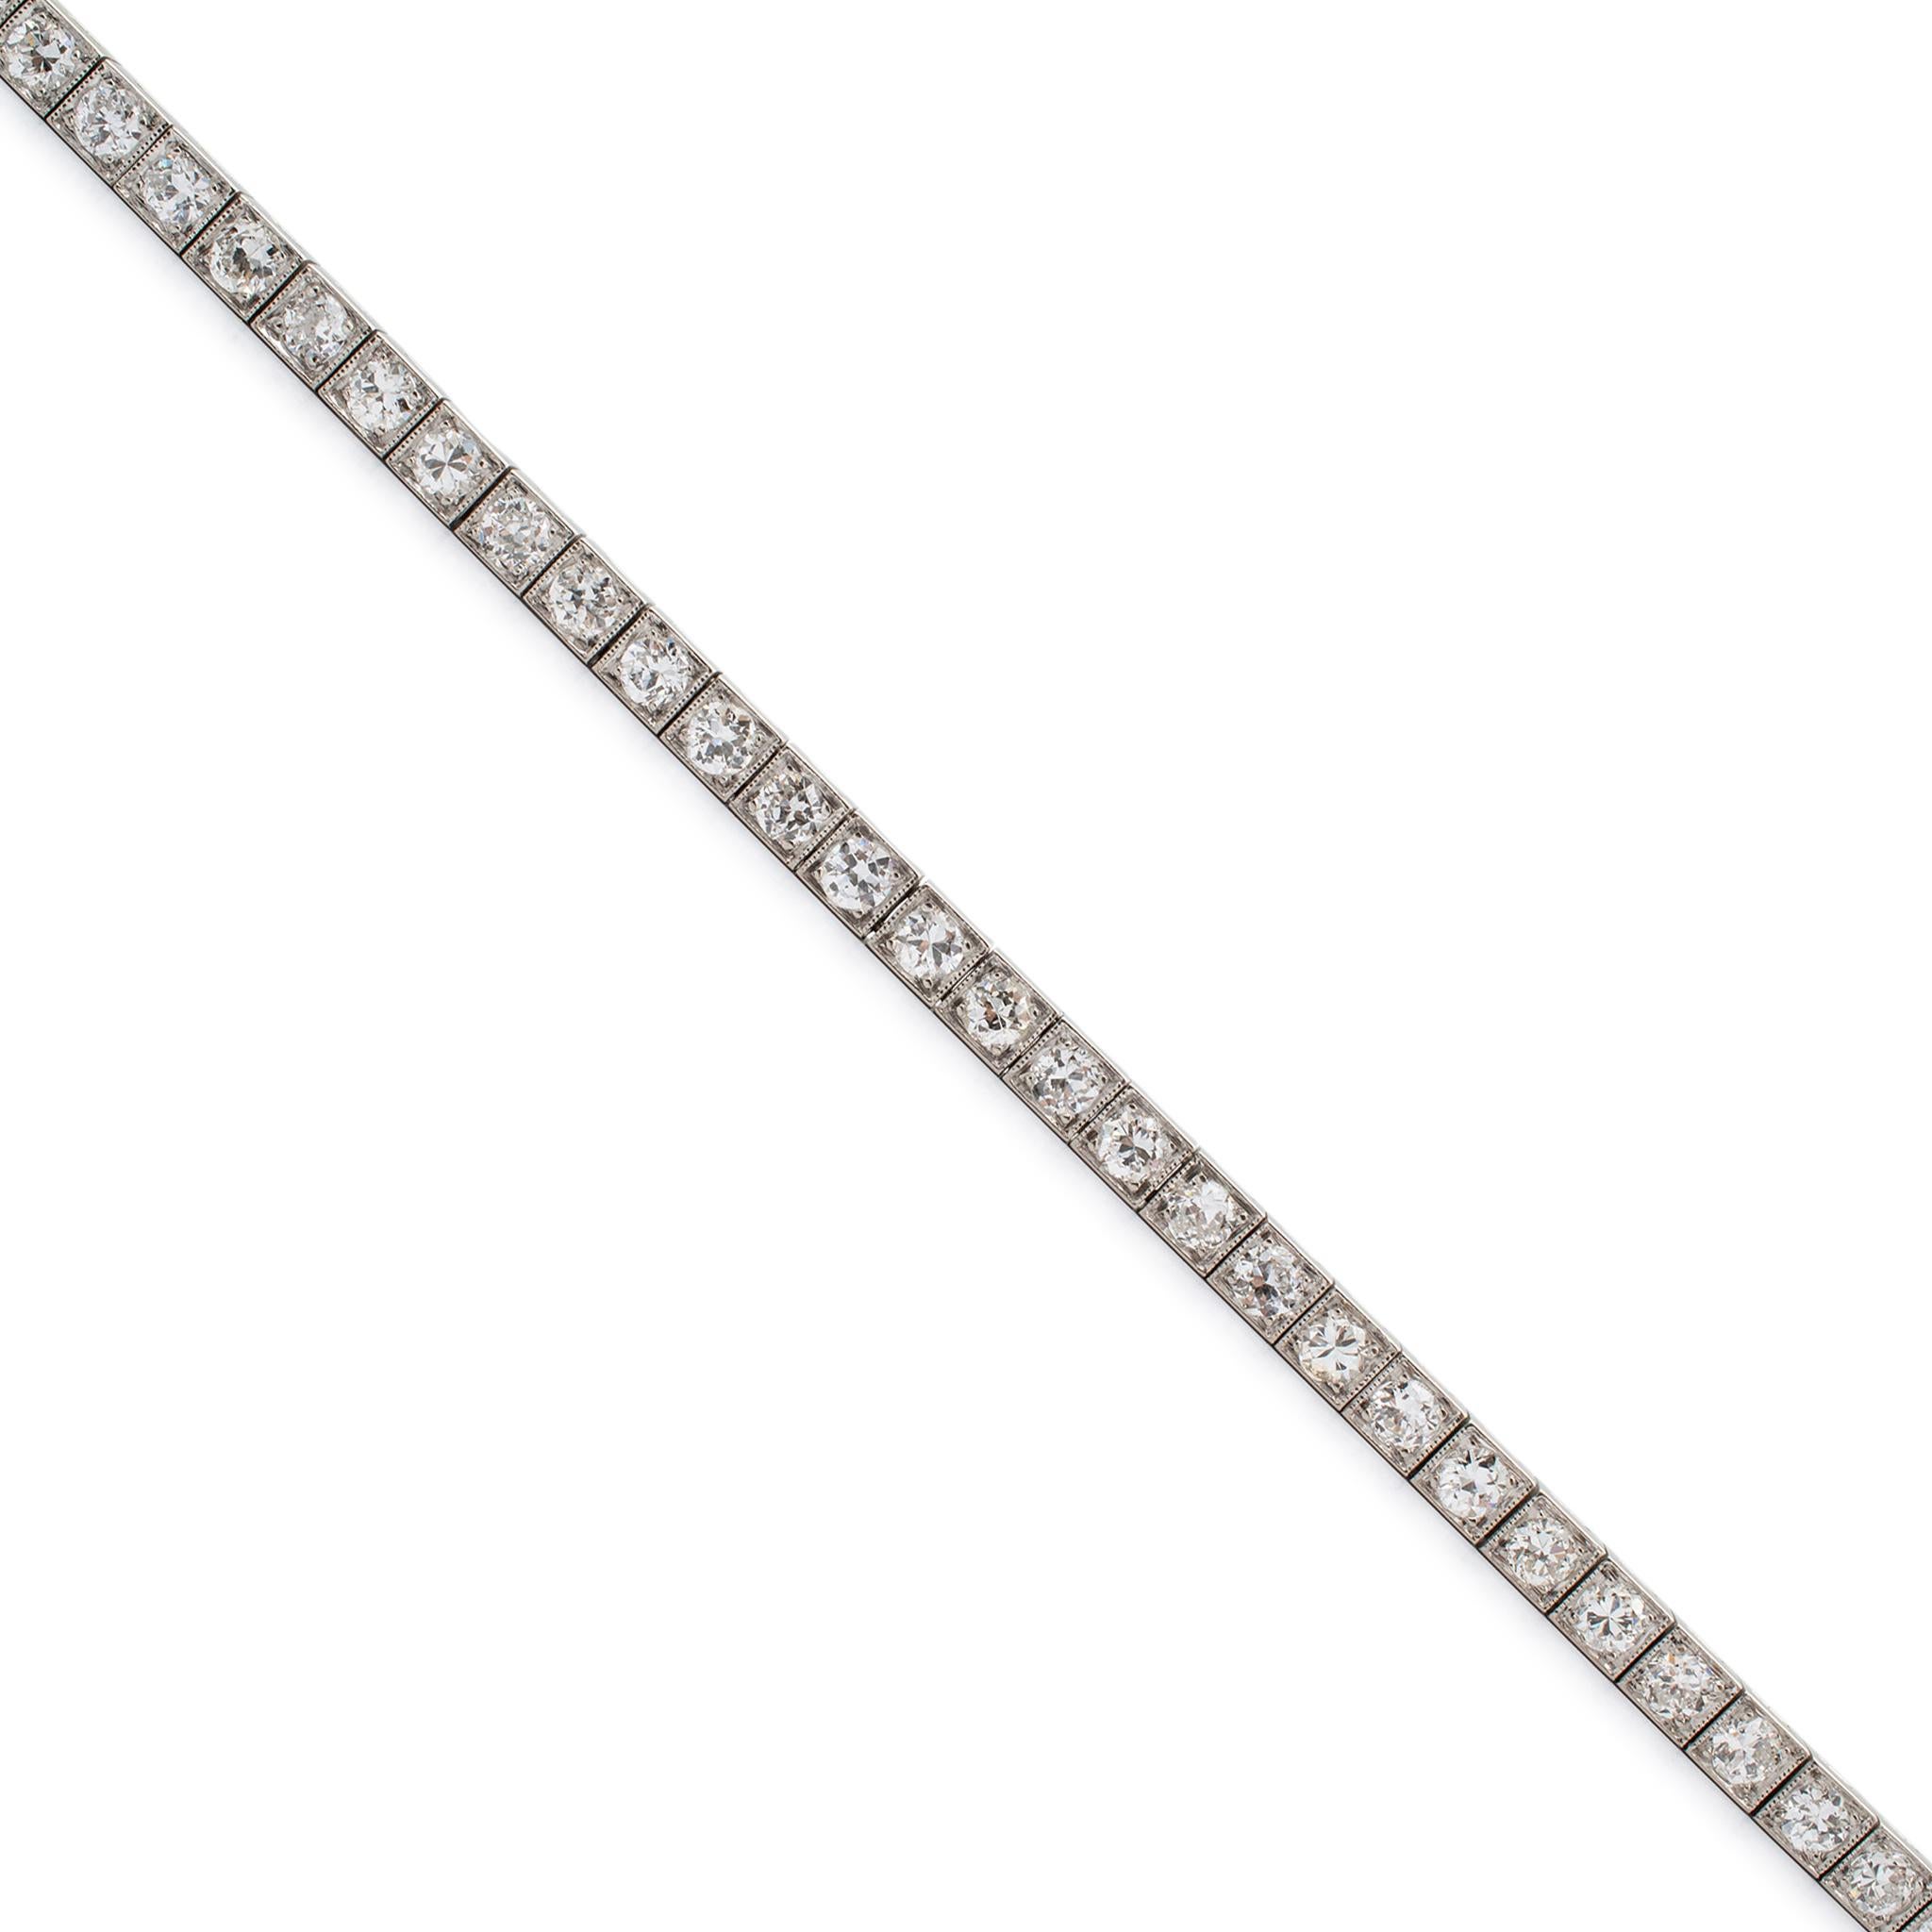 Gender: Ladies

Metal Type: 900 Platinum

Length: 7.00 inches

Width: 3.30 mm

Weight: 15.26 grams

One ladies  filigreed 900 platinum, diamond tennis bracelet. The metal was tested and determined to be 900 platinum.

Antique unpolished in excellent